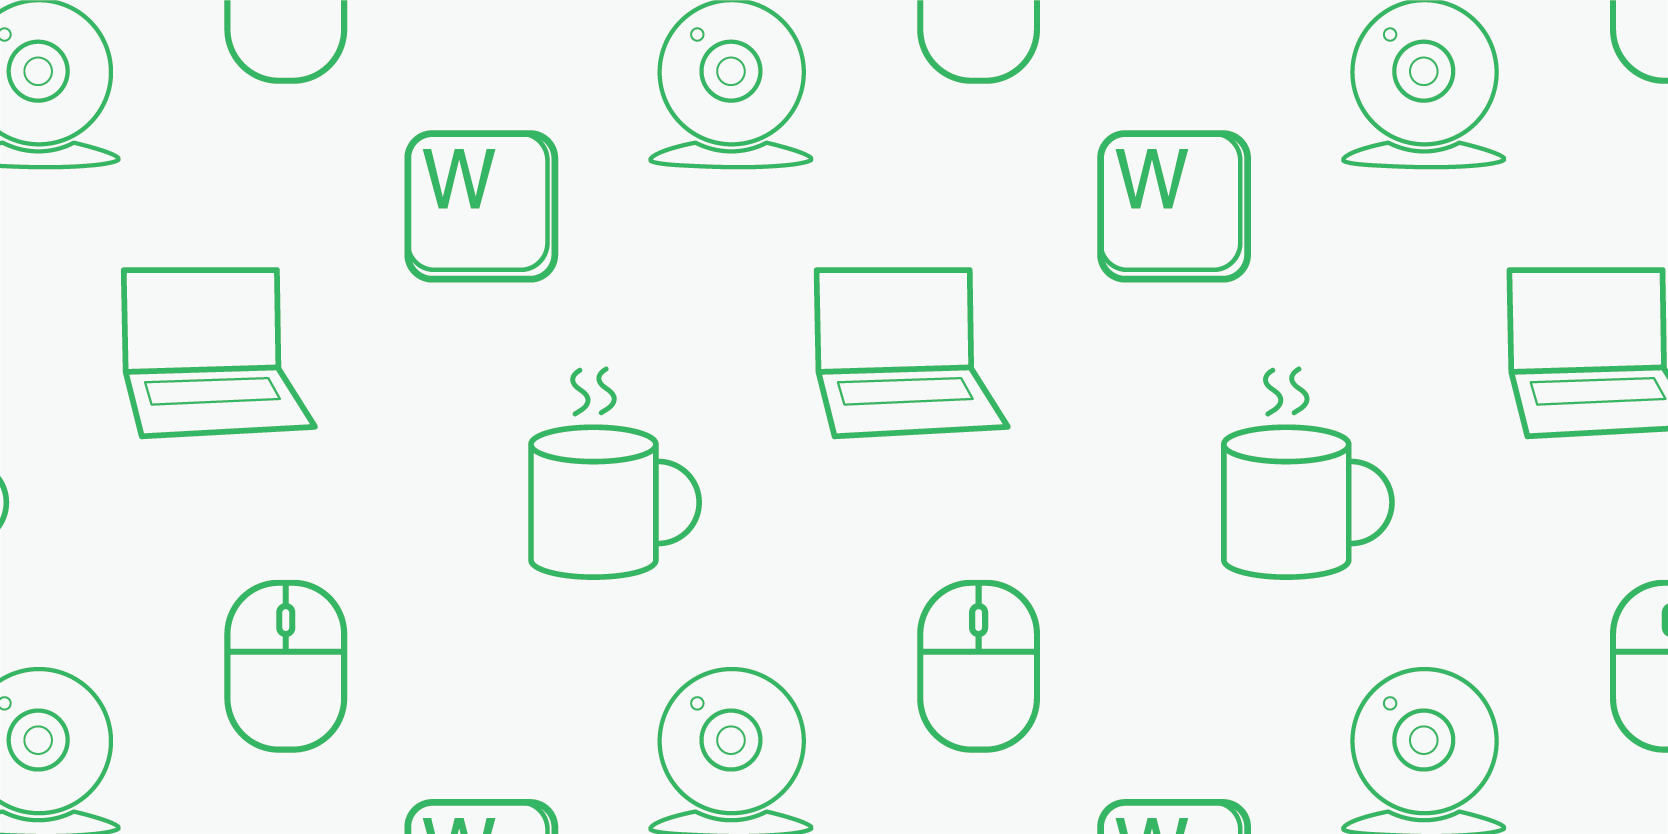 An image of a vector icon pattern of laptop computers, webcams, coffee mugs and computer mouses.